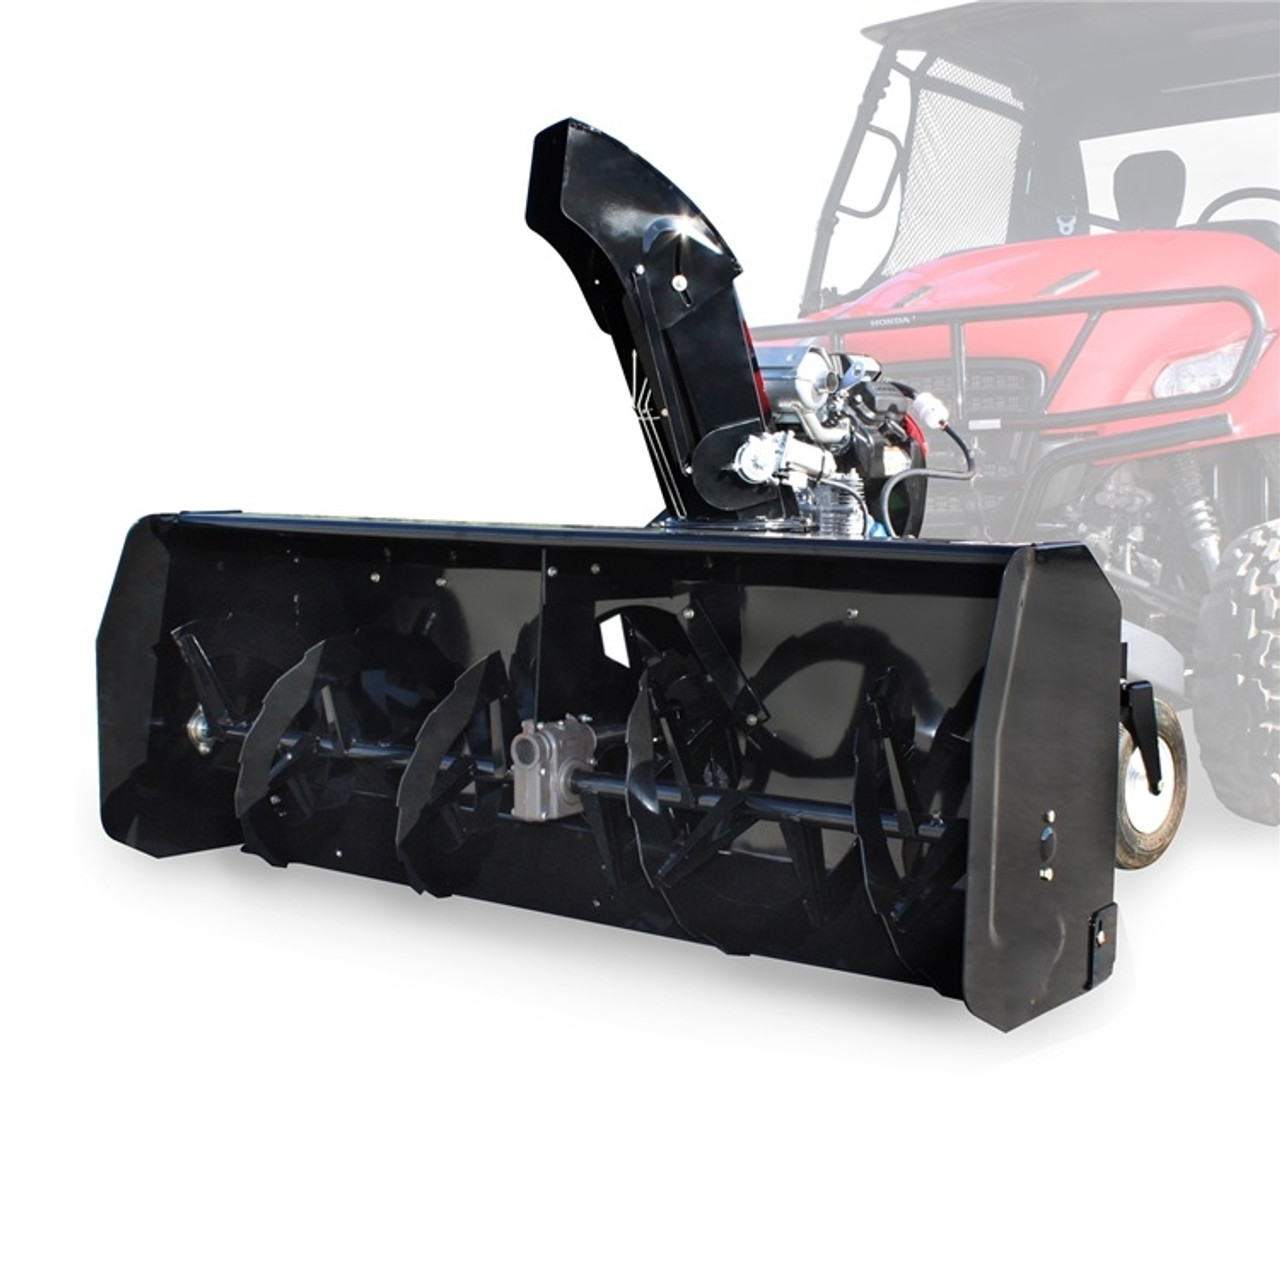 A front-oblique image of a 72-inch Bercomac snow plow, installed on an ATV against a blank background